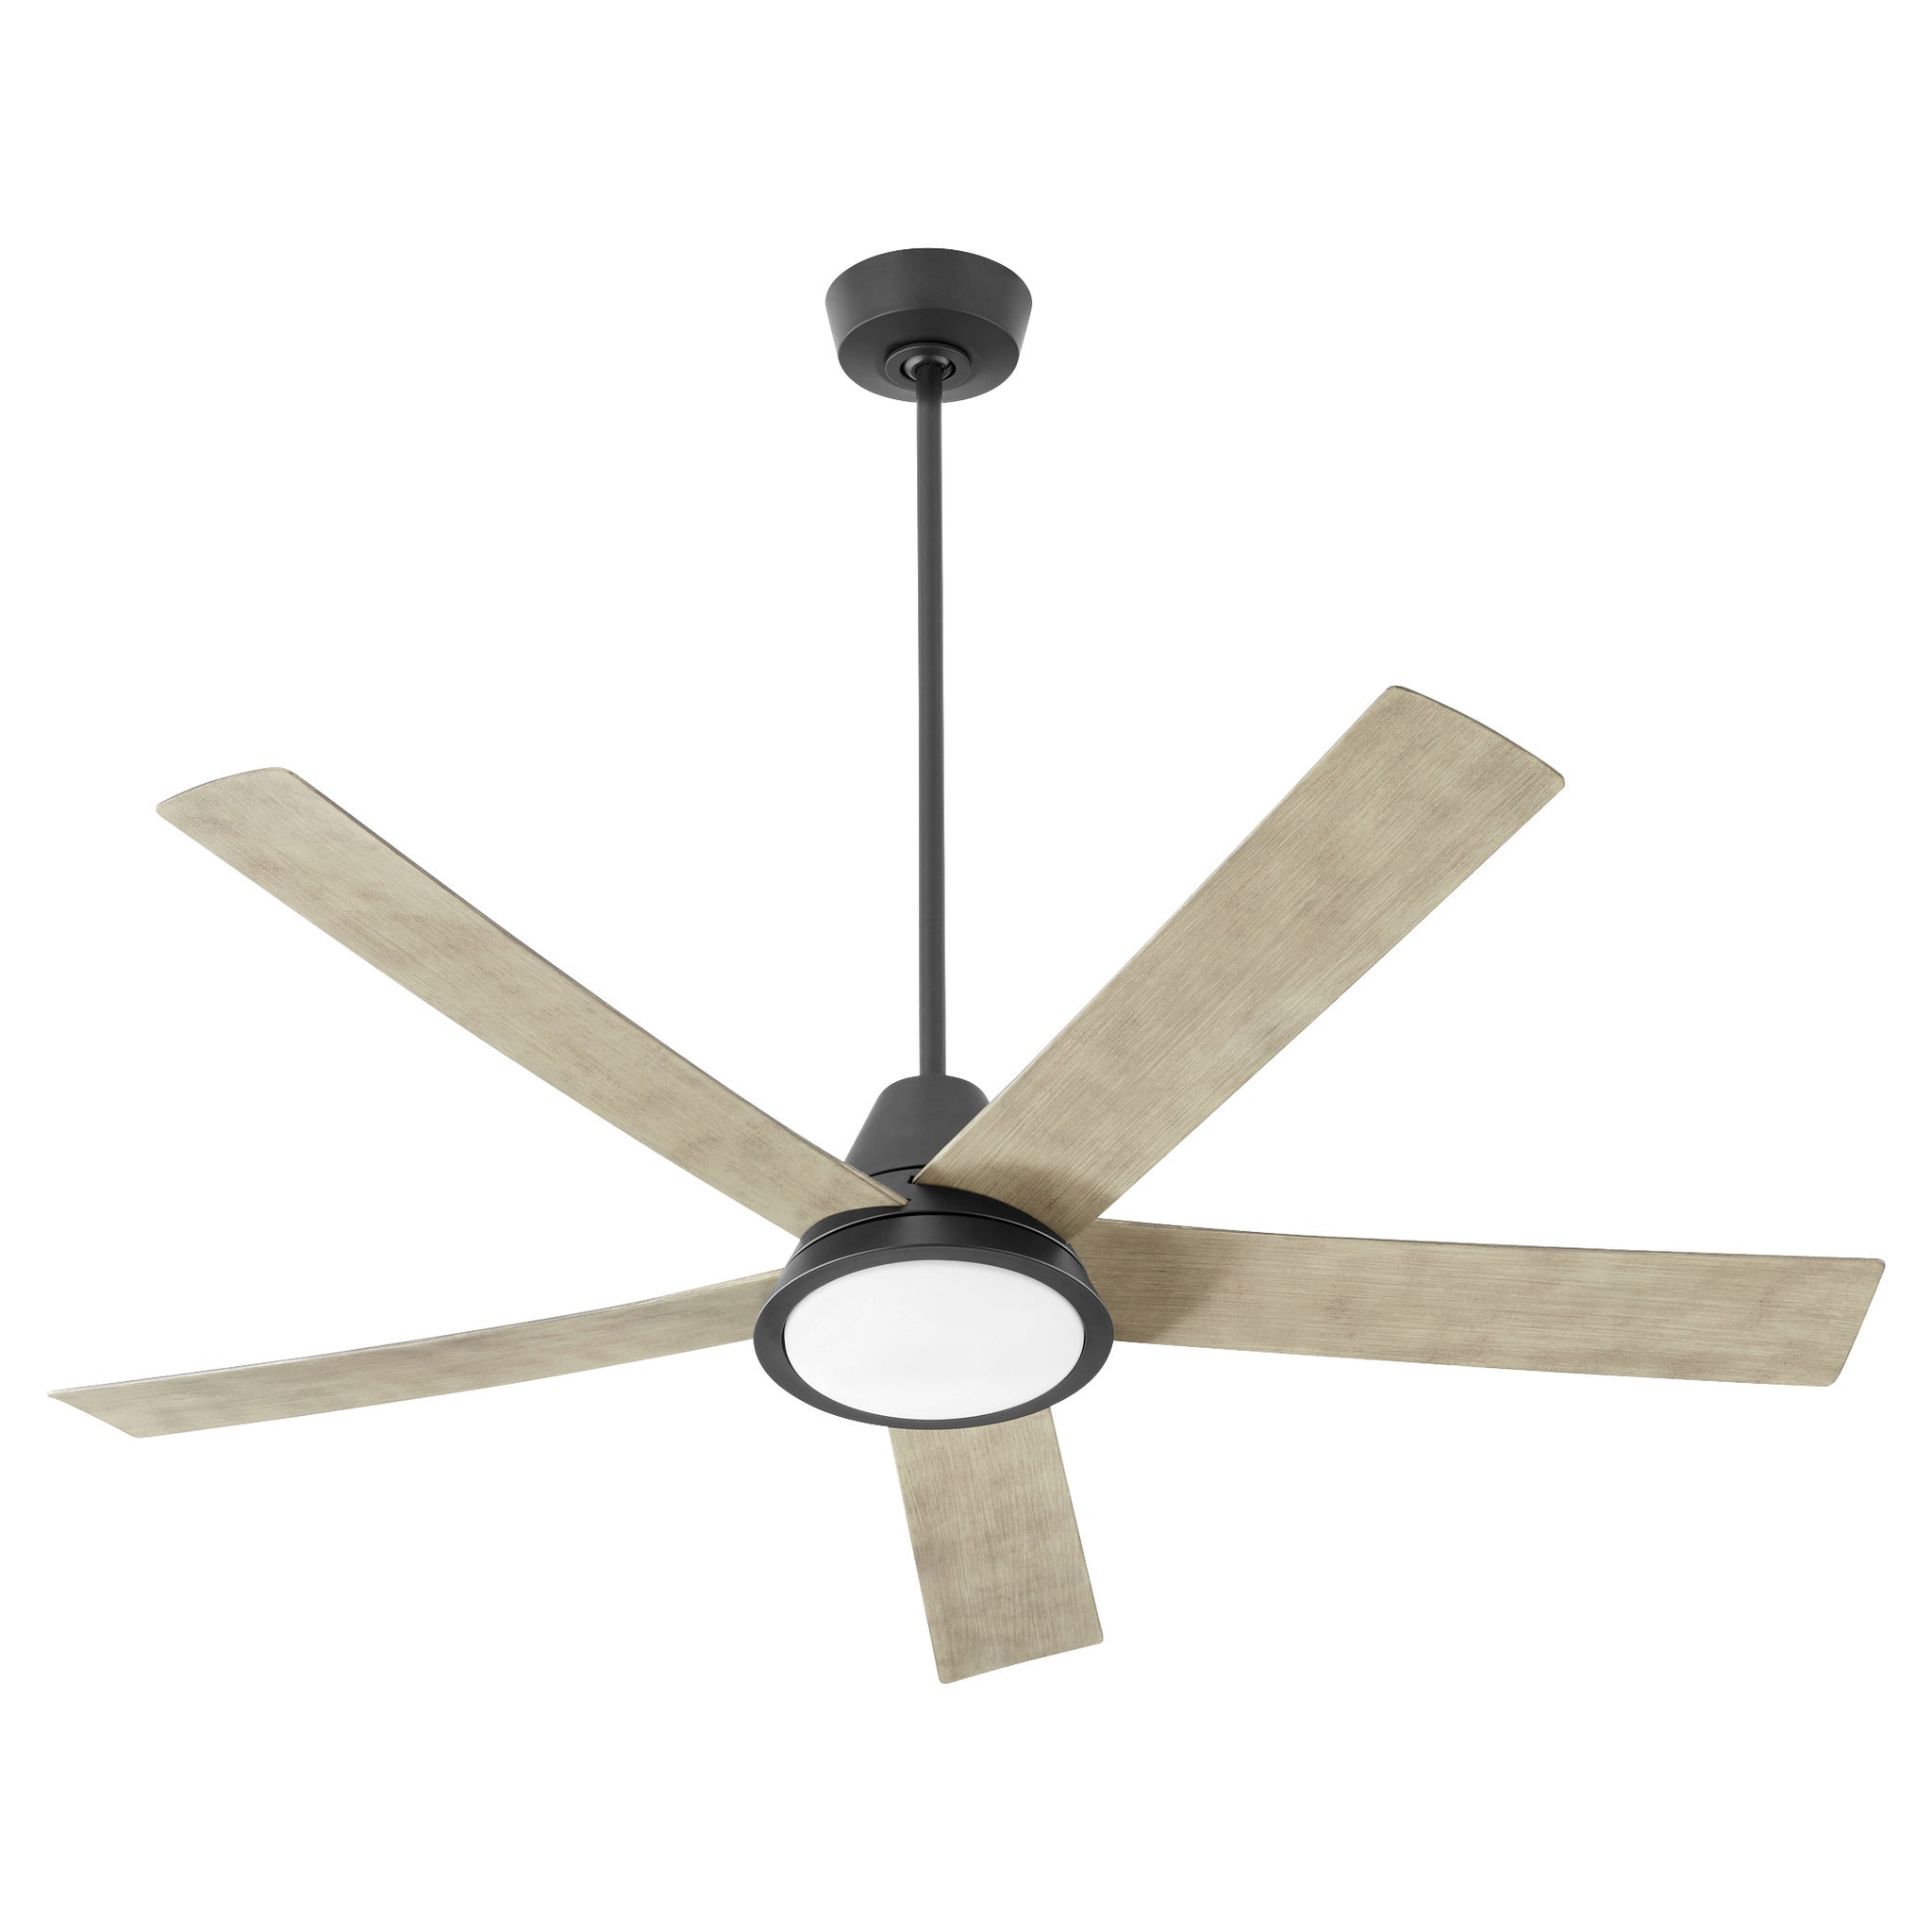 Oxygen TEMPLE 56 Inch Ceiling Fan with LED Light, Wet Rated, 6 Speeds Reversible with Wall Control